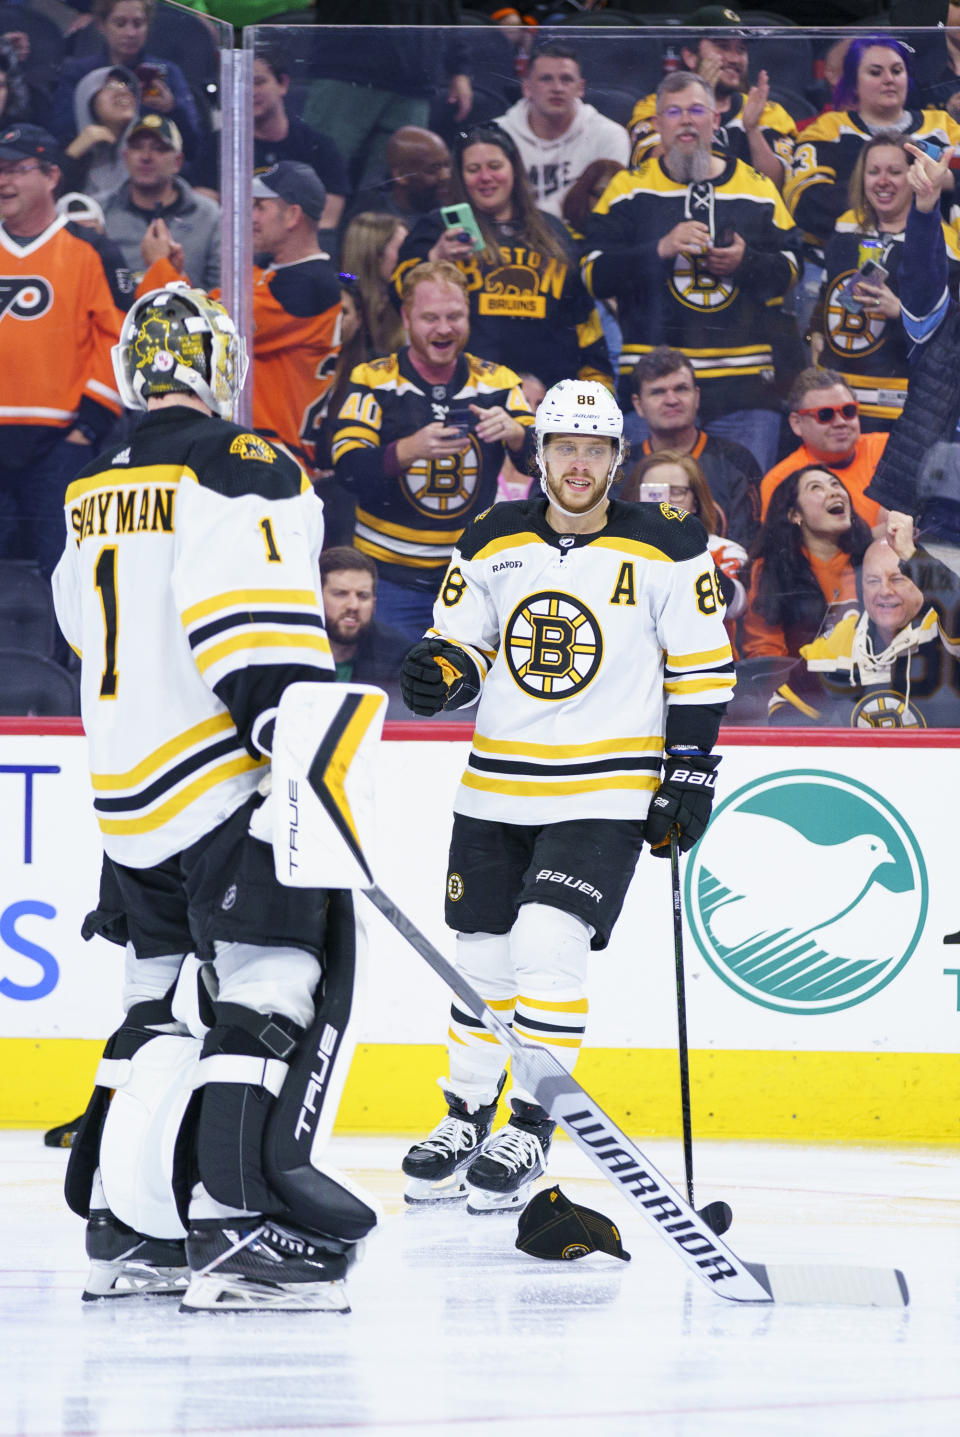 Boston Bruins' David Pastrnak, right, celebrates his third goal with Jeremy Swayman, left, during the third period of an NHL hockey game against the Philadelphia Flyers, Sunday, April 9, 2023, in Philadelphia. The Bruins won 5-3.(AP Photo/Chris Szagola)